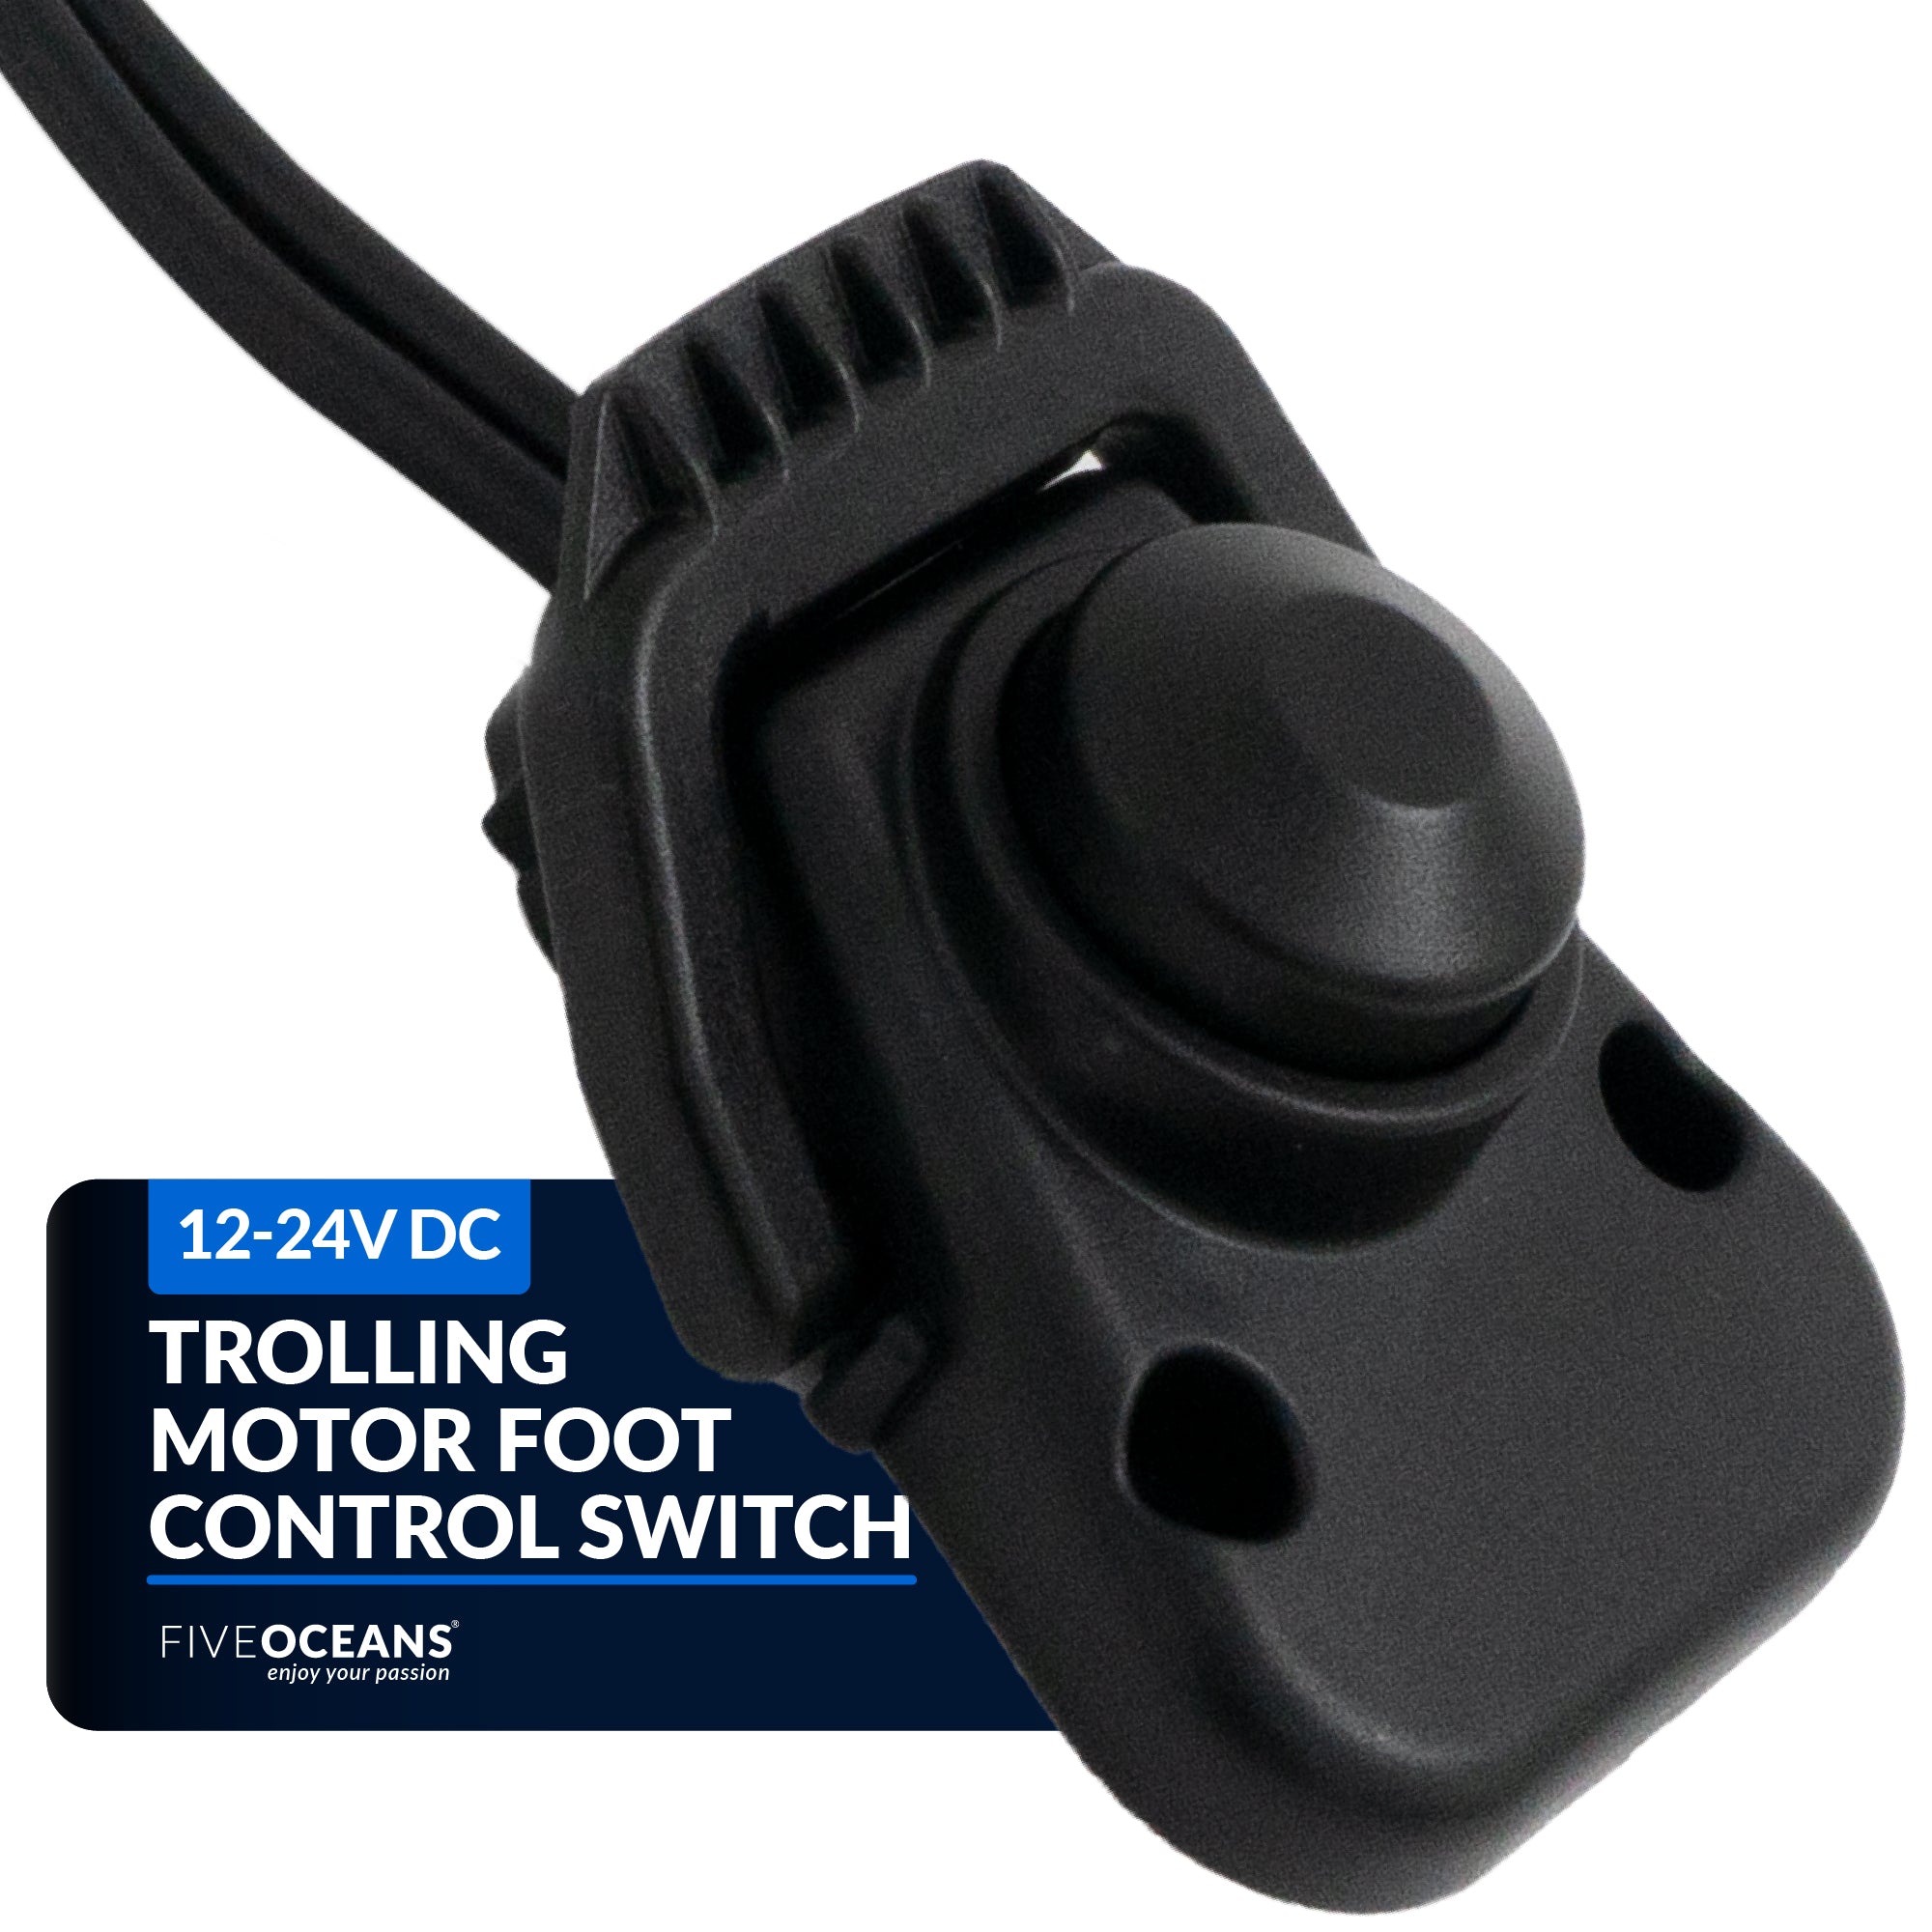 Trolling Motor Foot Switch with  On Lever Continuous Control, 12-24V - FO4601